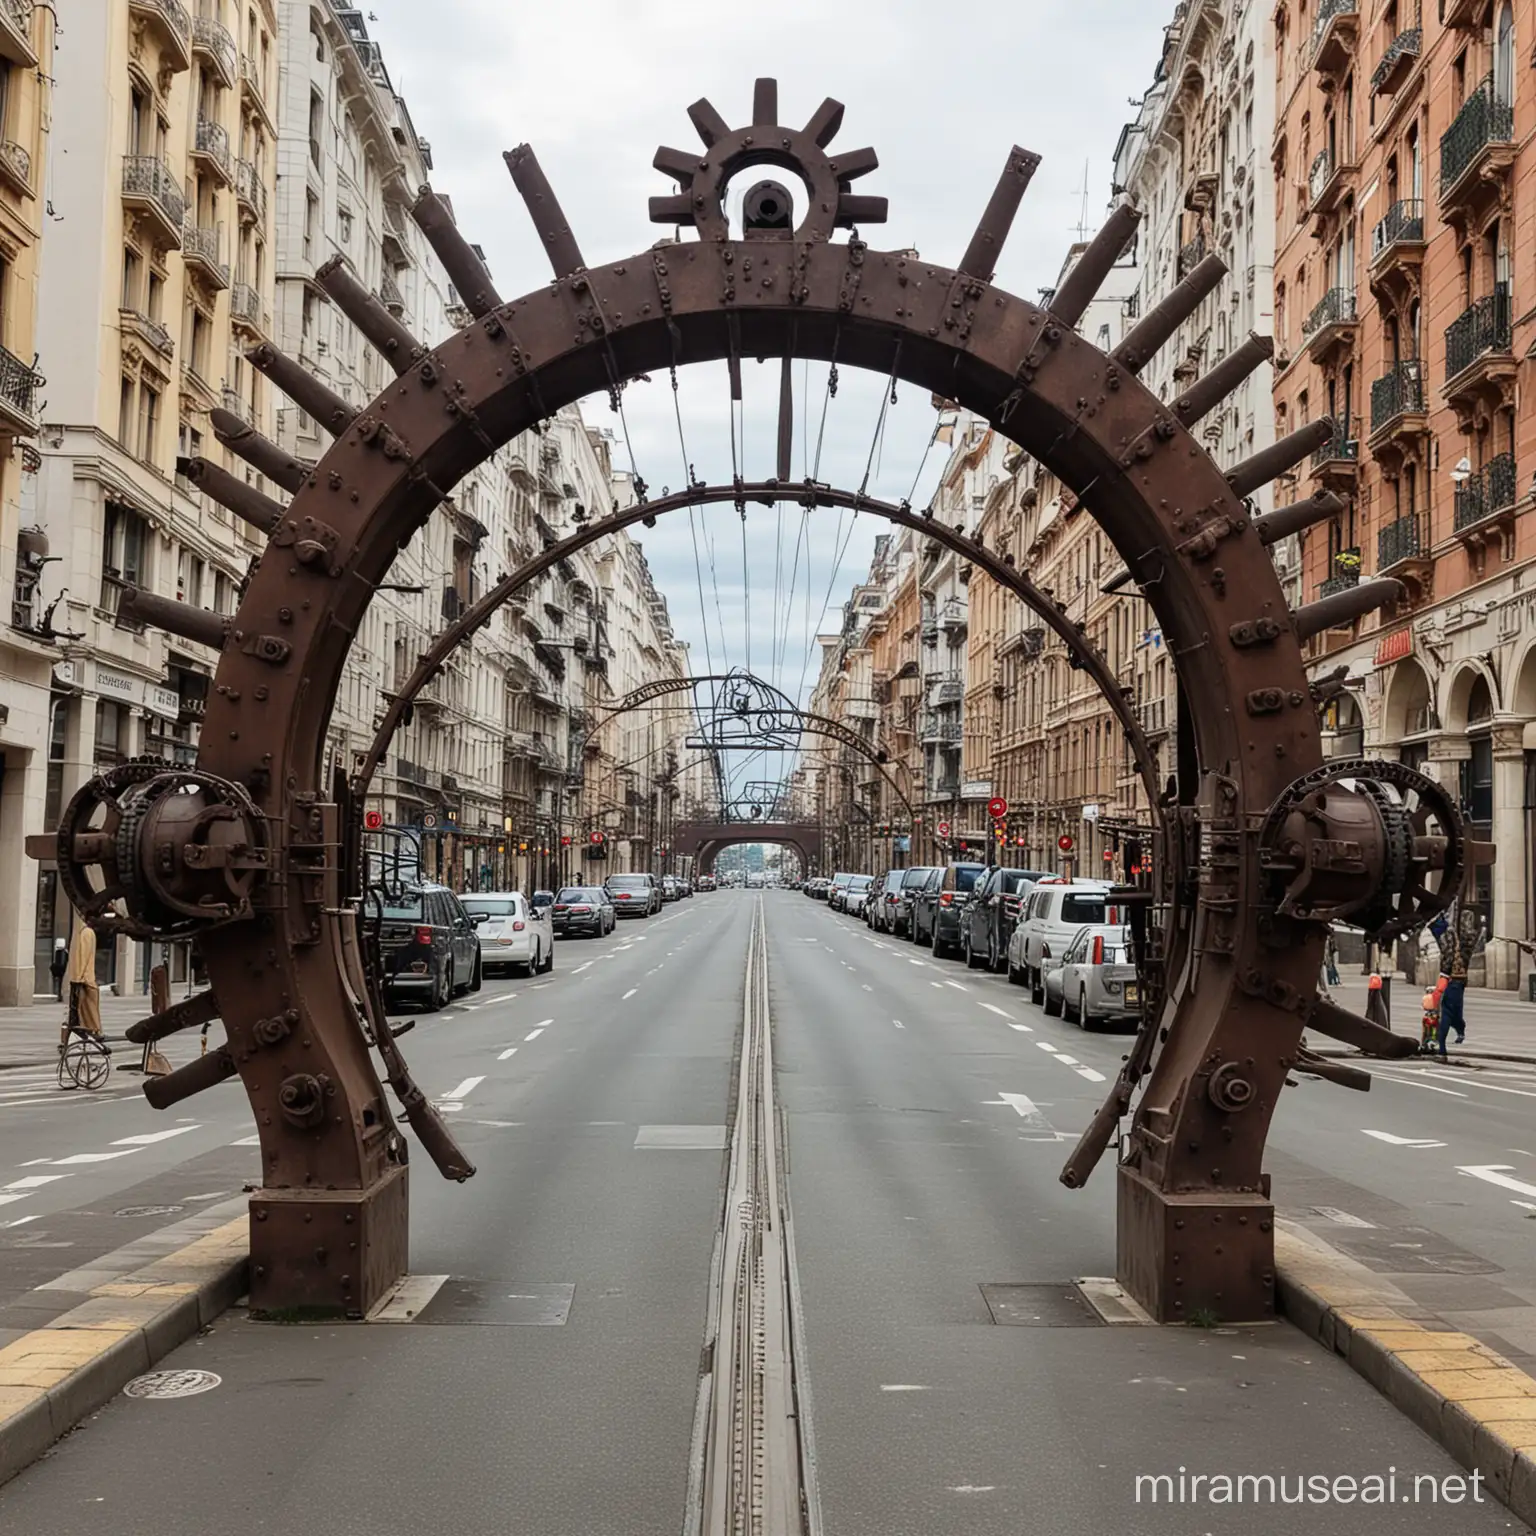 Gates in the shape of a ship's gear for the passage of cars as entrances to the city